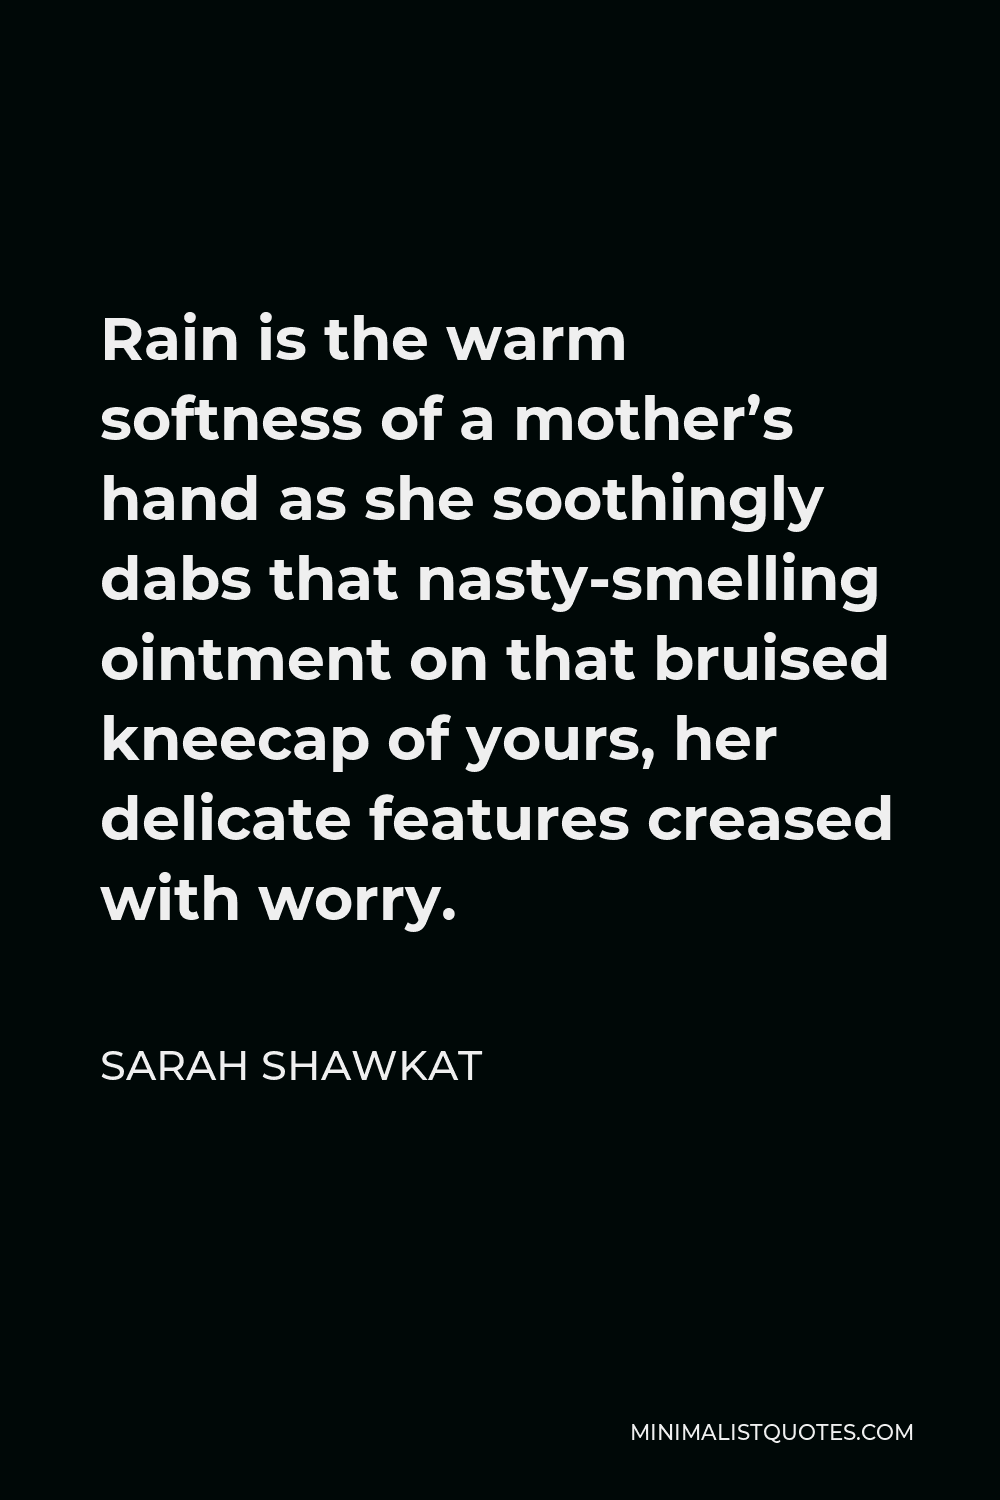 Sarah Shawkat Quote - Rain is the warm softness of a mother’s hand as she soothingly dabs that nasty-smelling ointment on that bruised kneecap of yours, her delicate features creased with worry.